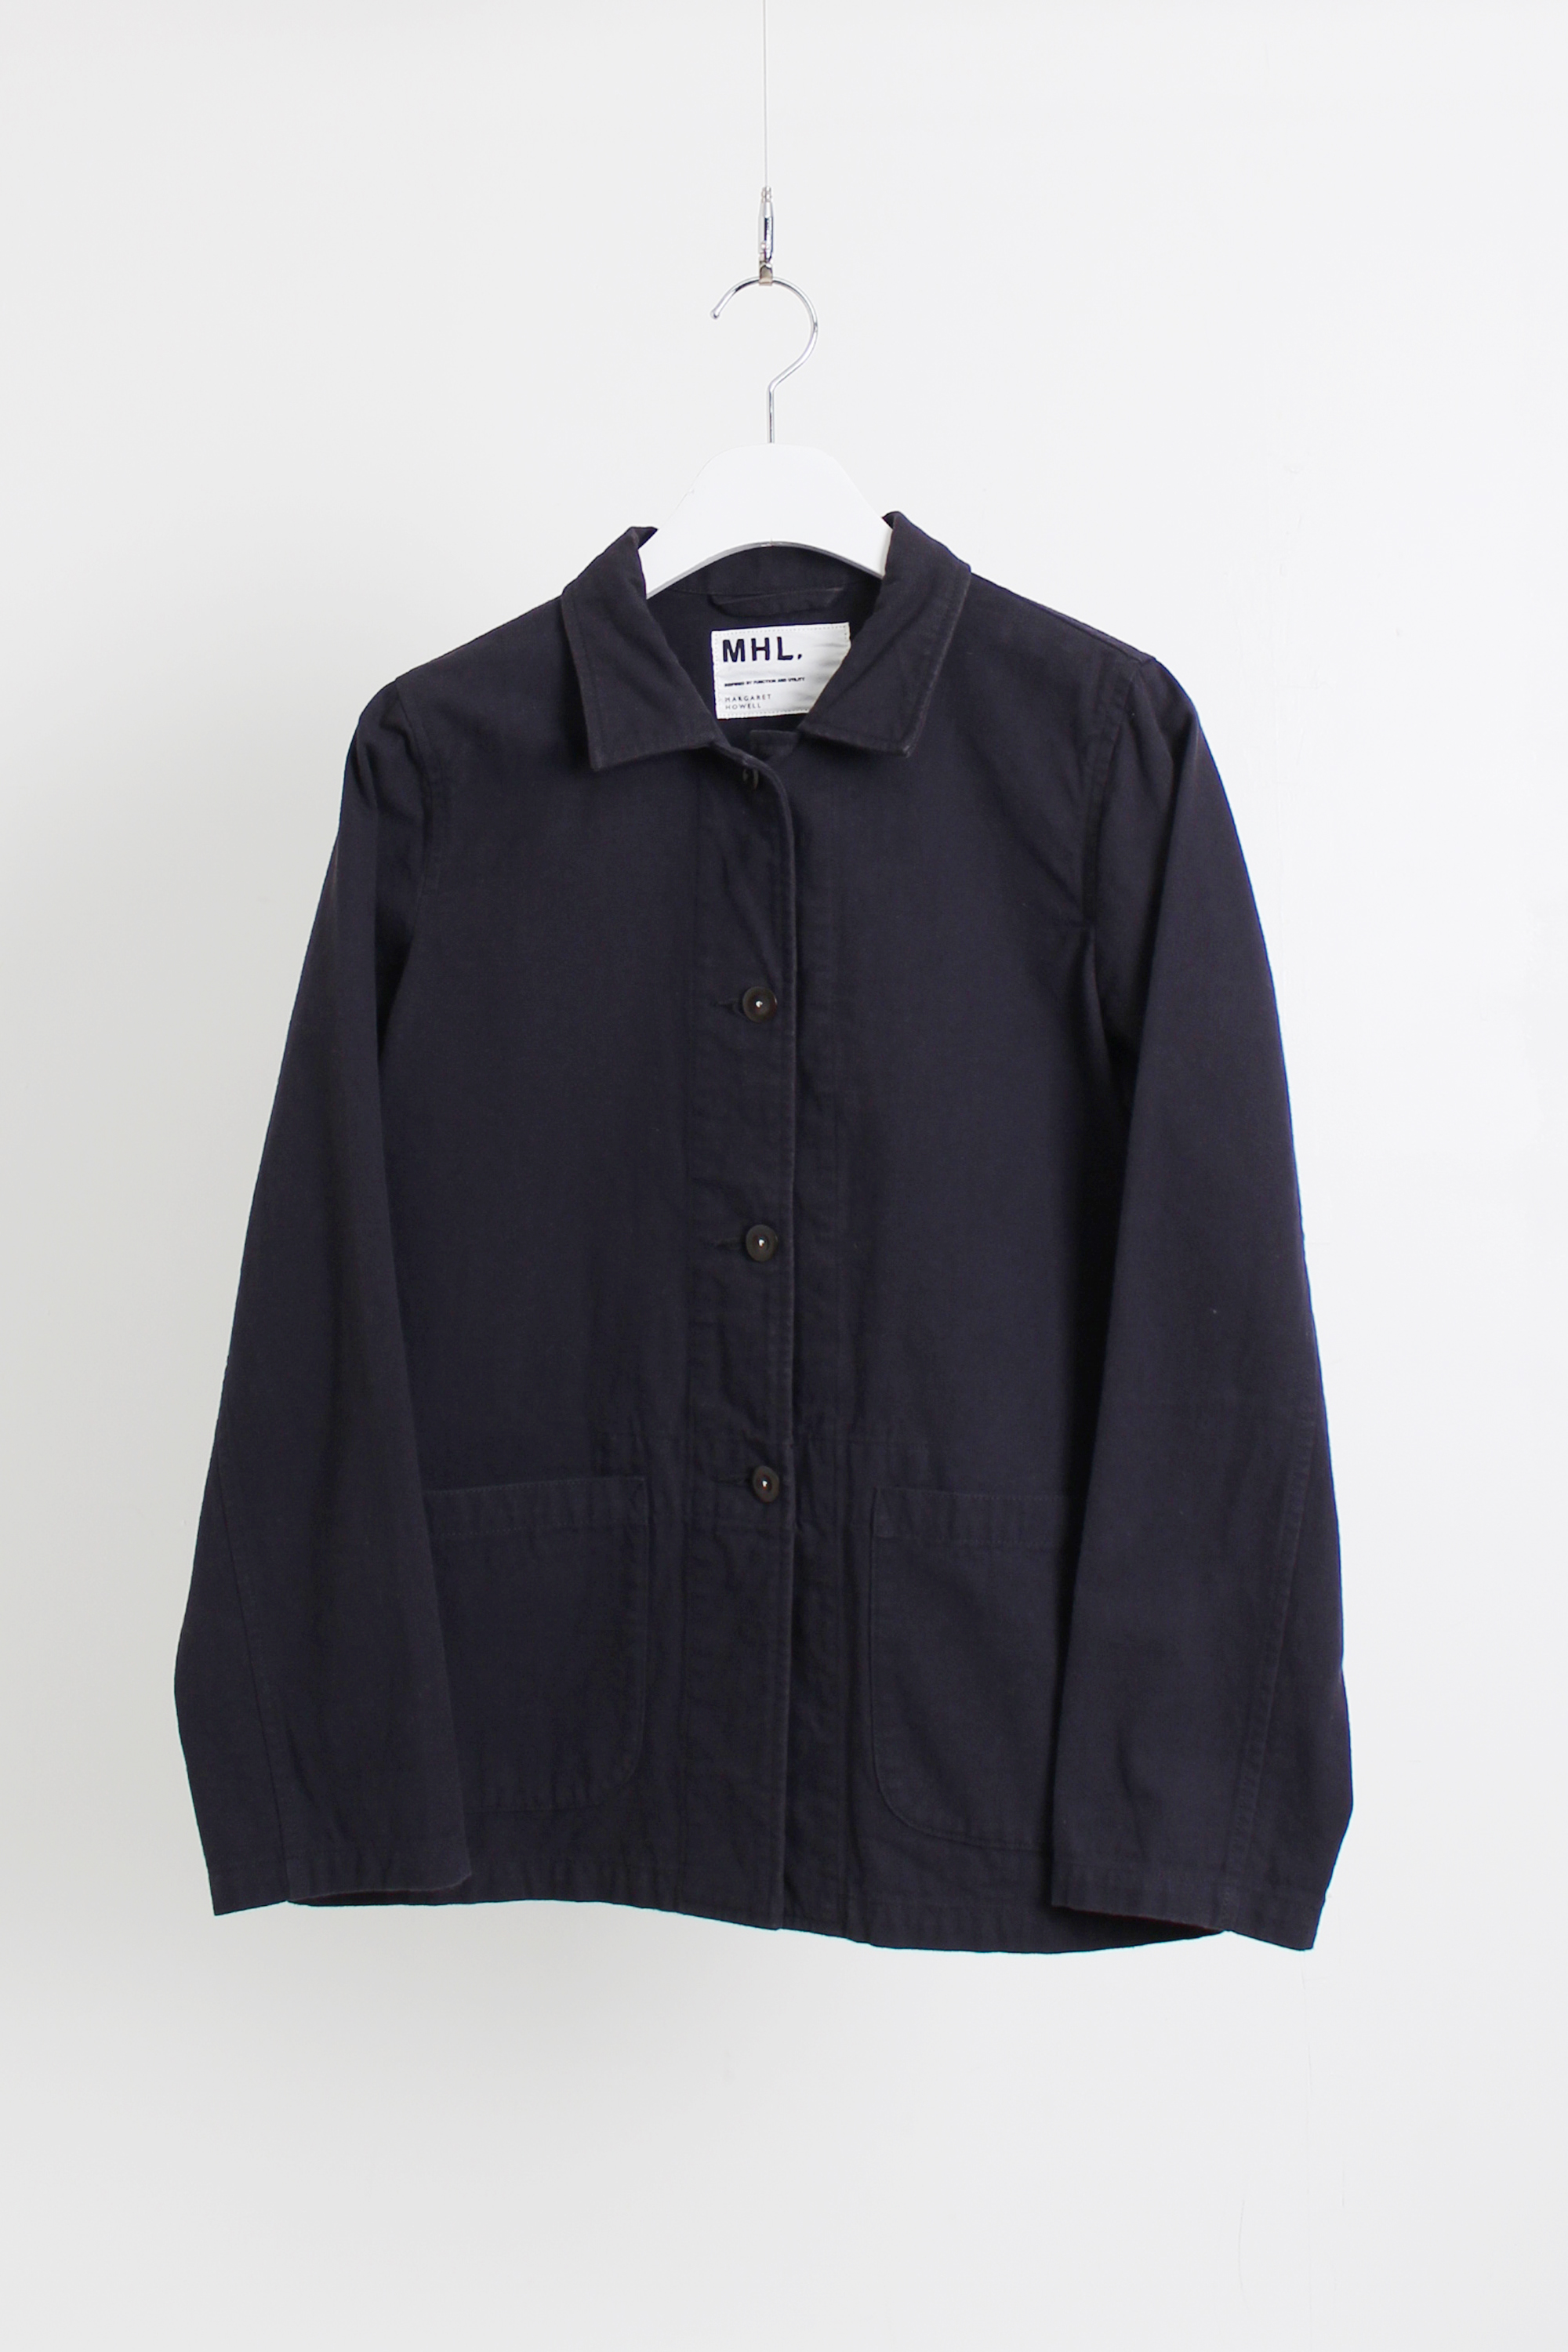 MHL cotton coverall jacket